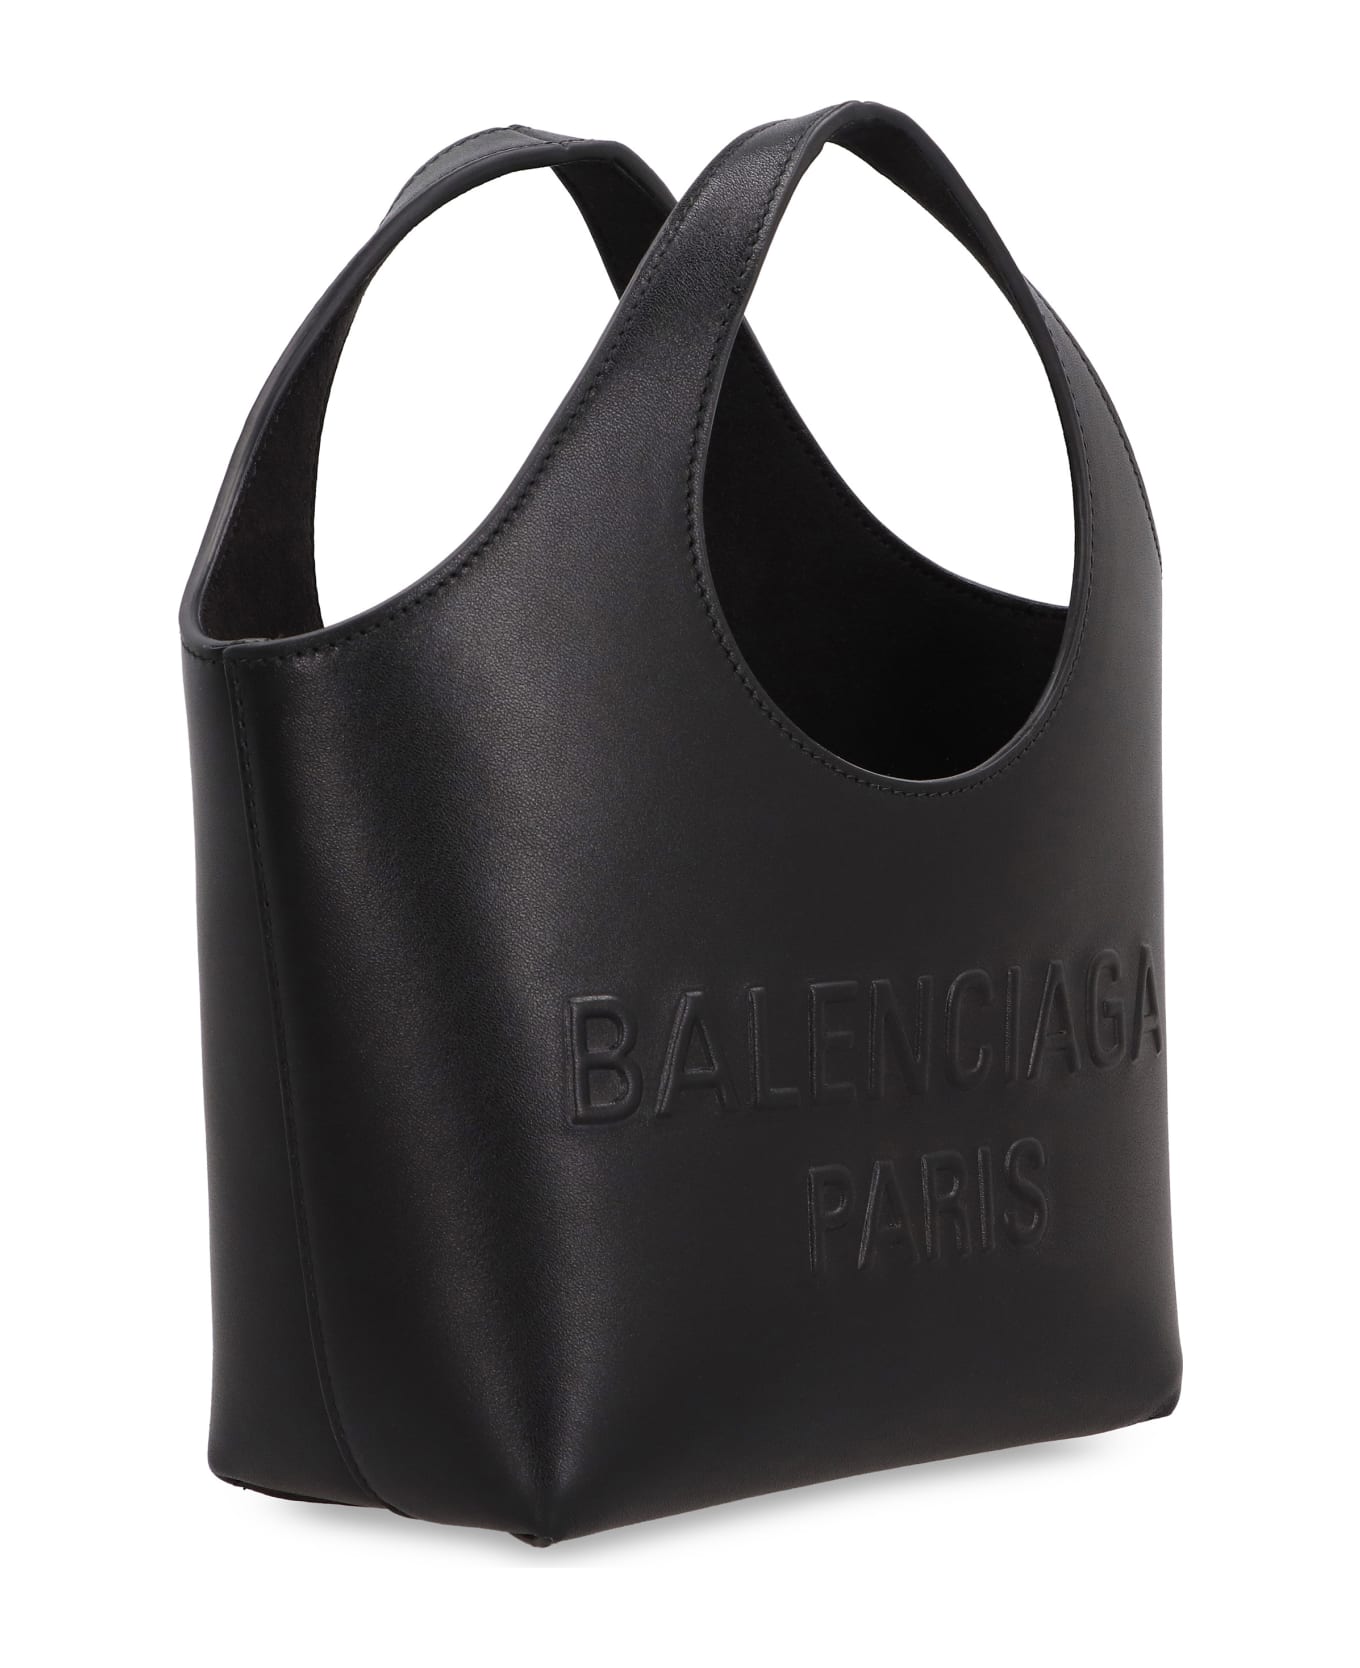 Balenciaga Mary-kate Xs Leather Tote - black トートバッグ